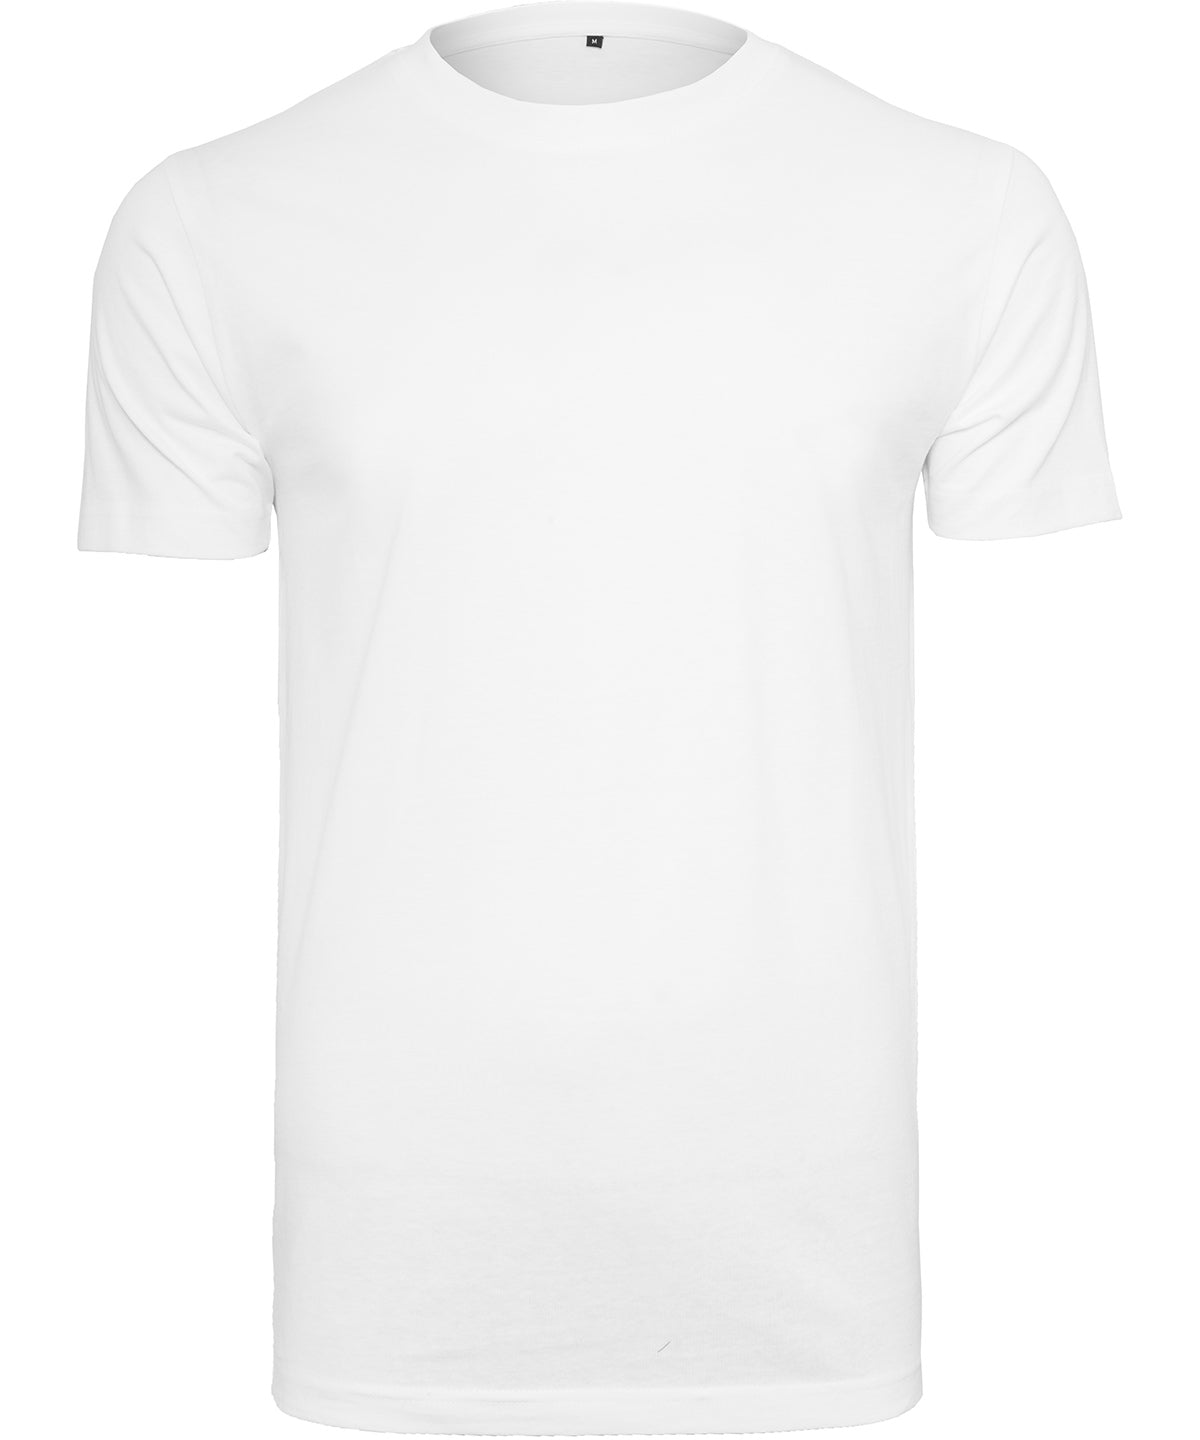 Personalised T-Shirts - Black Build Your Brand Organic t-shirt round neck